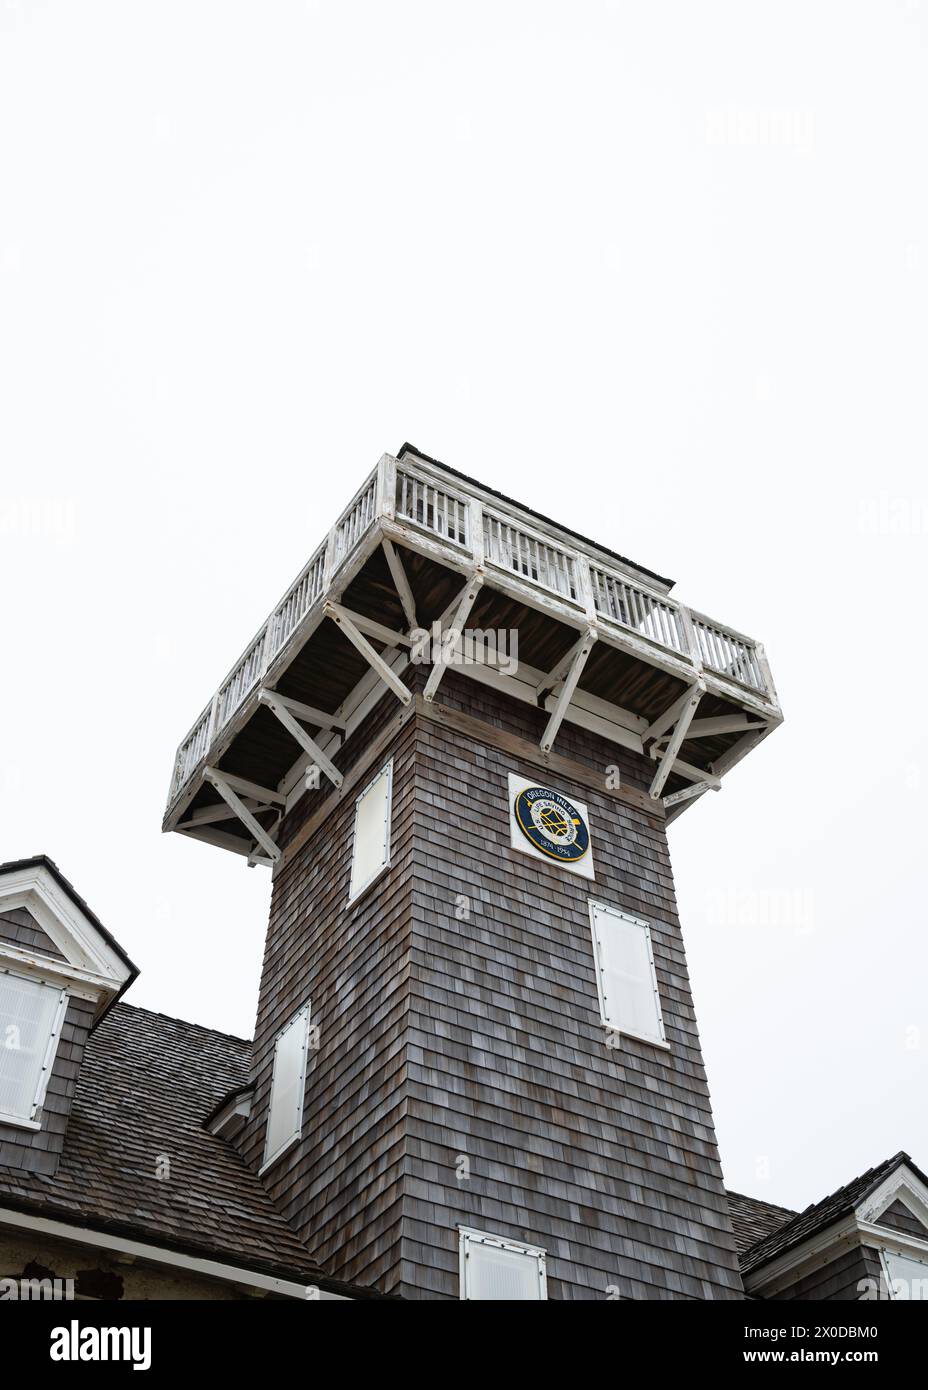 Oregon Inlet life Saving Station tower against a white sky Stock Photo